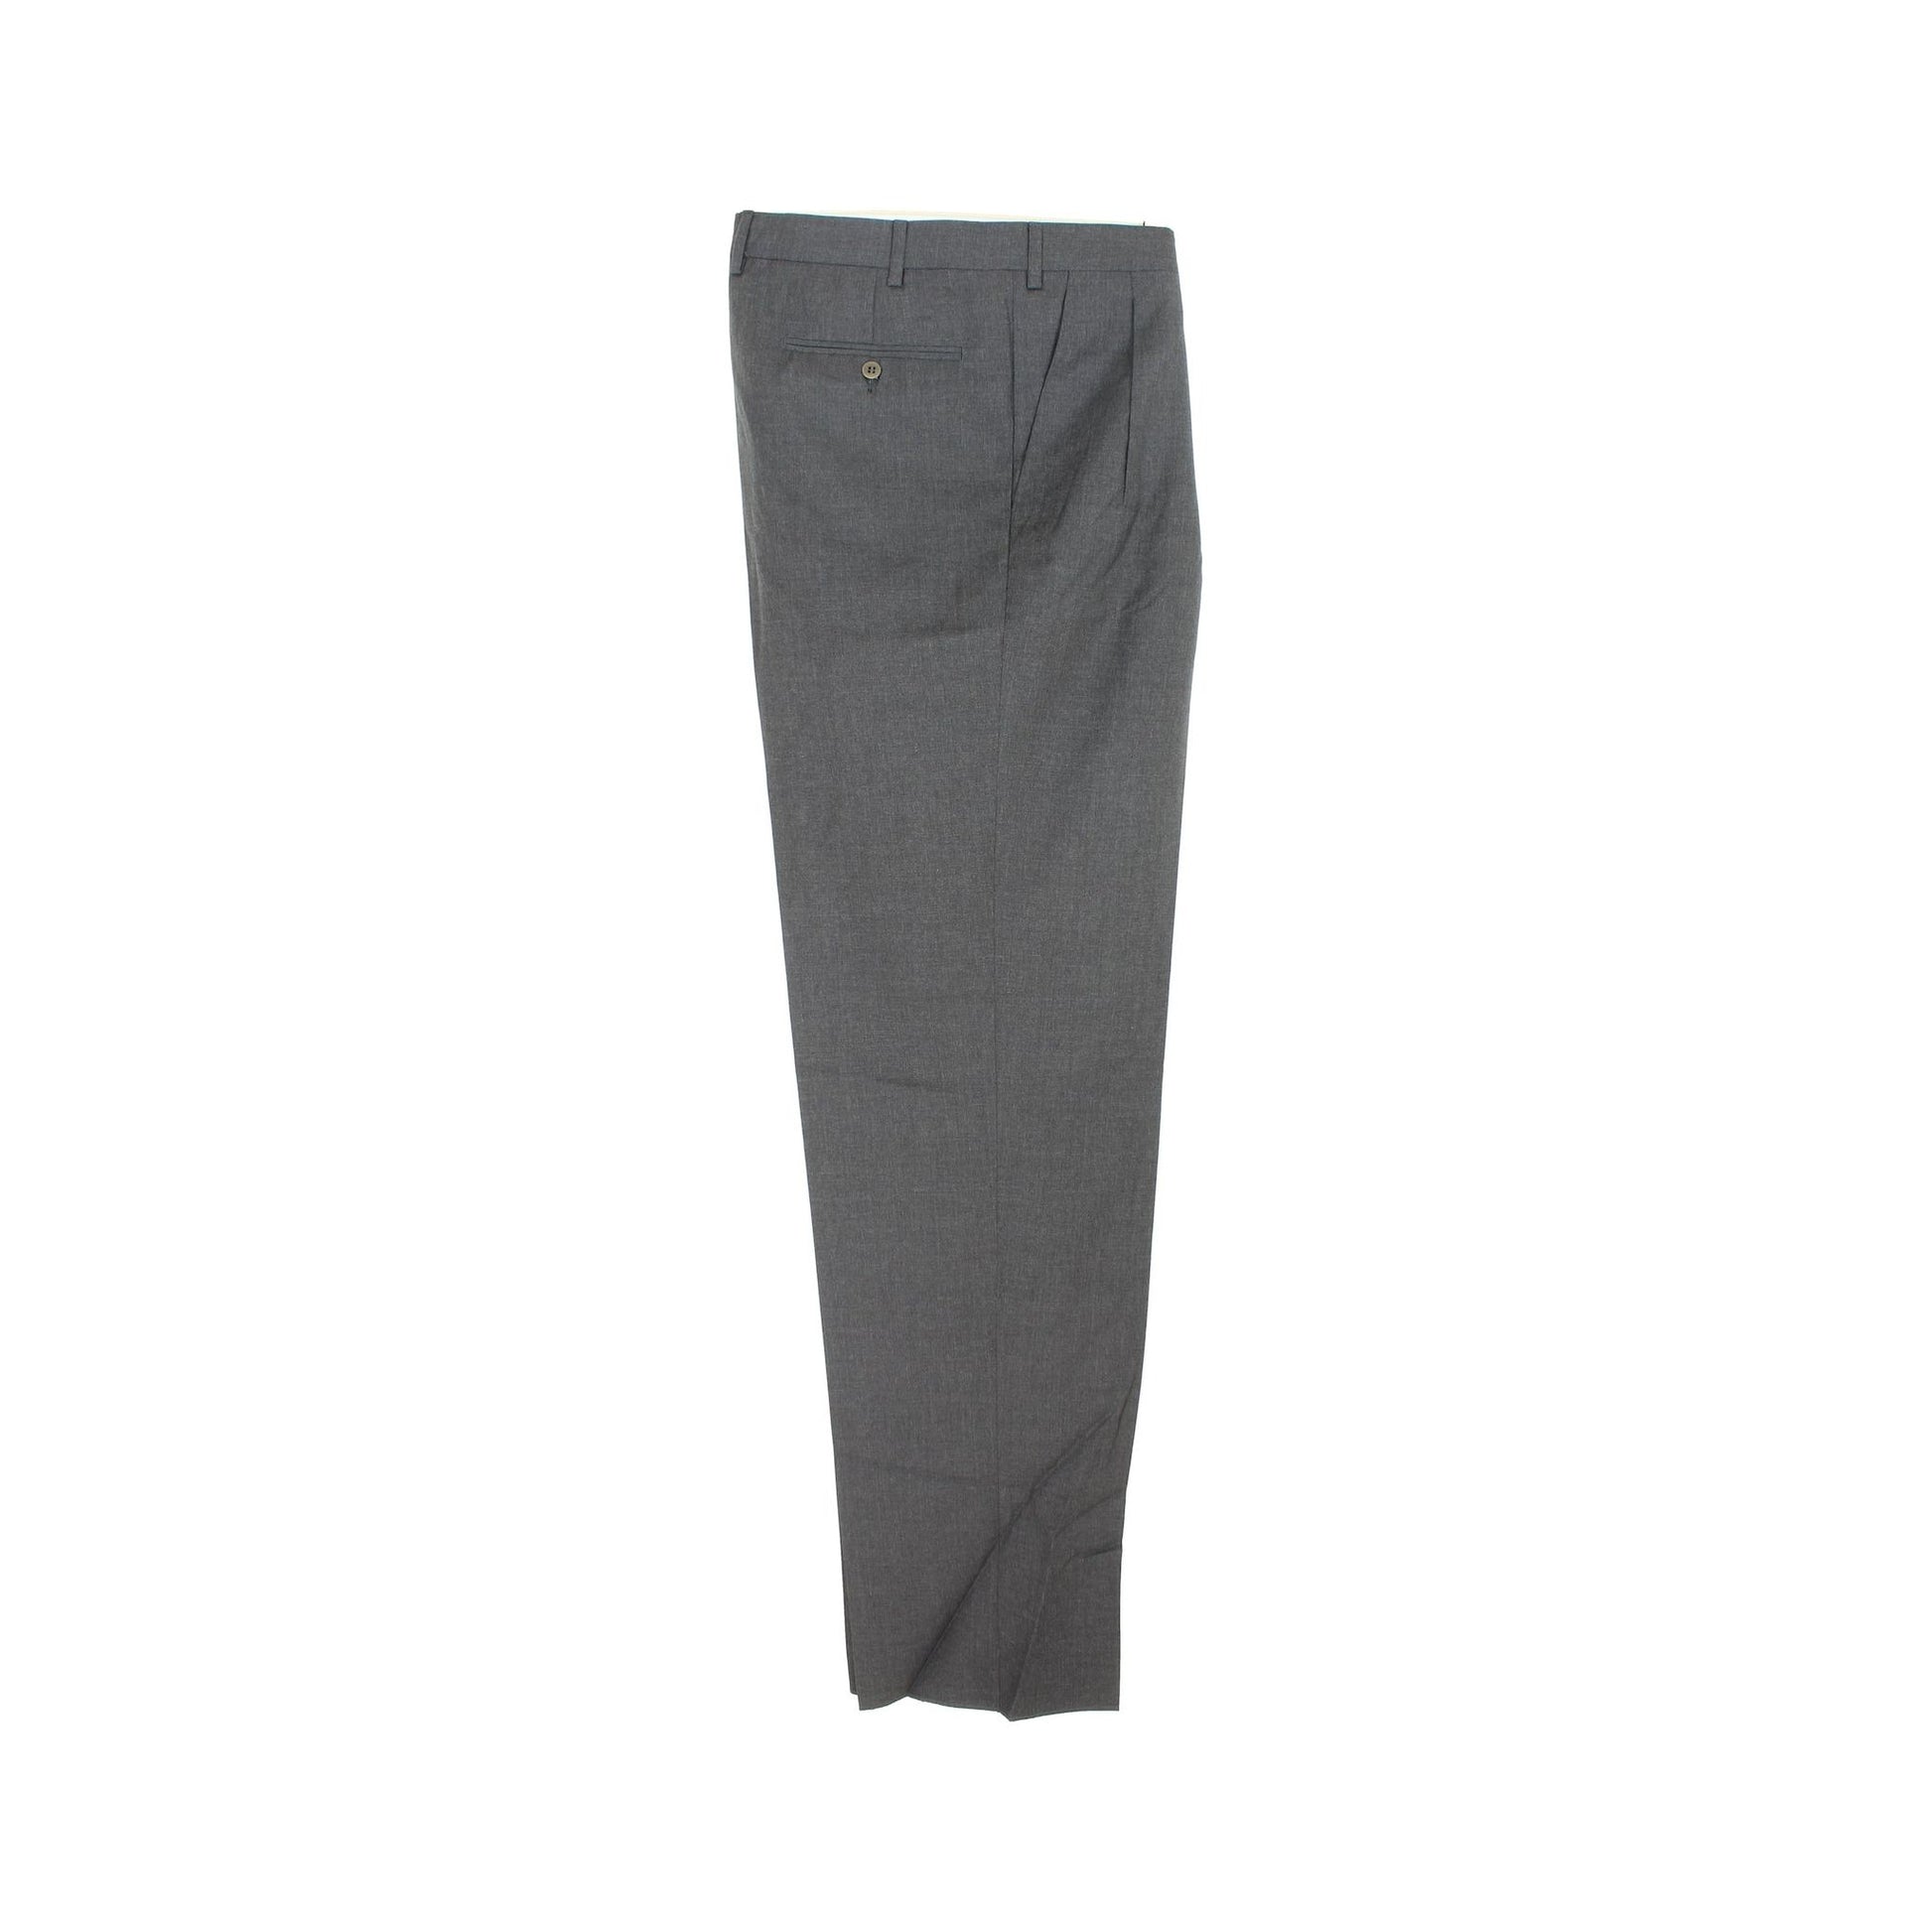 burberry grey trousers